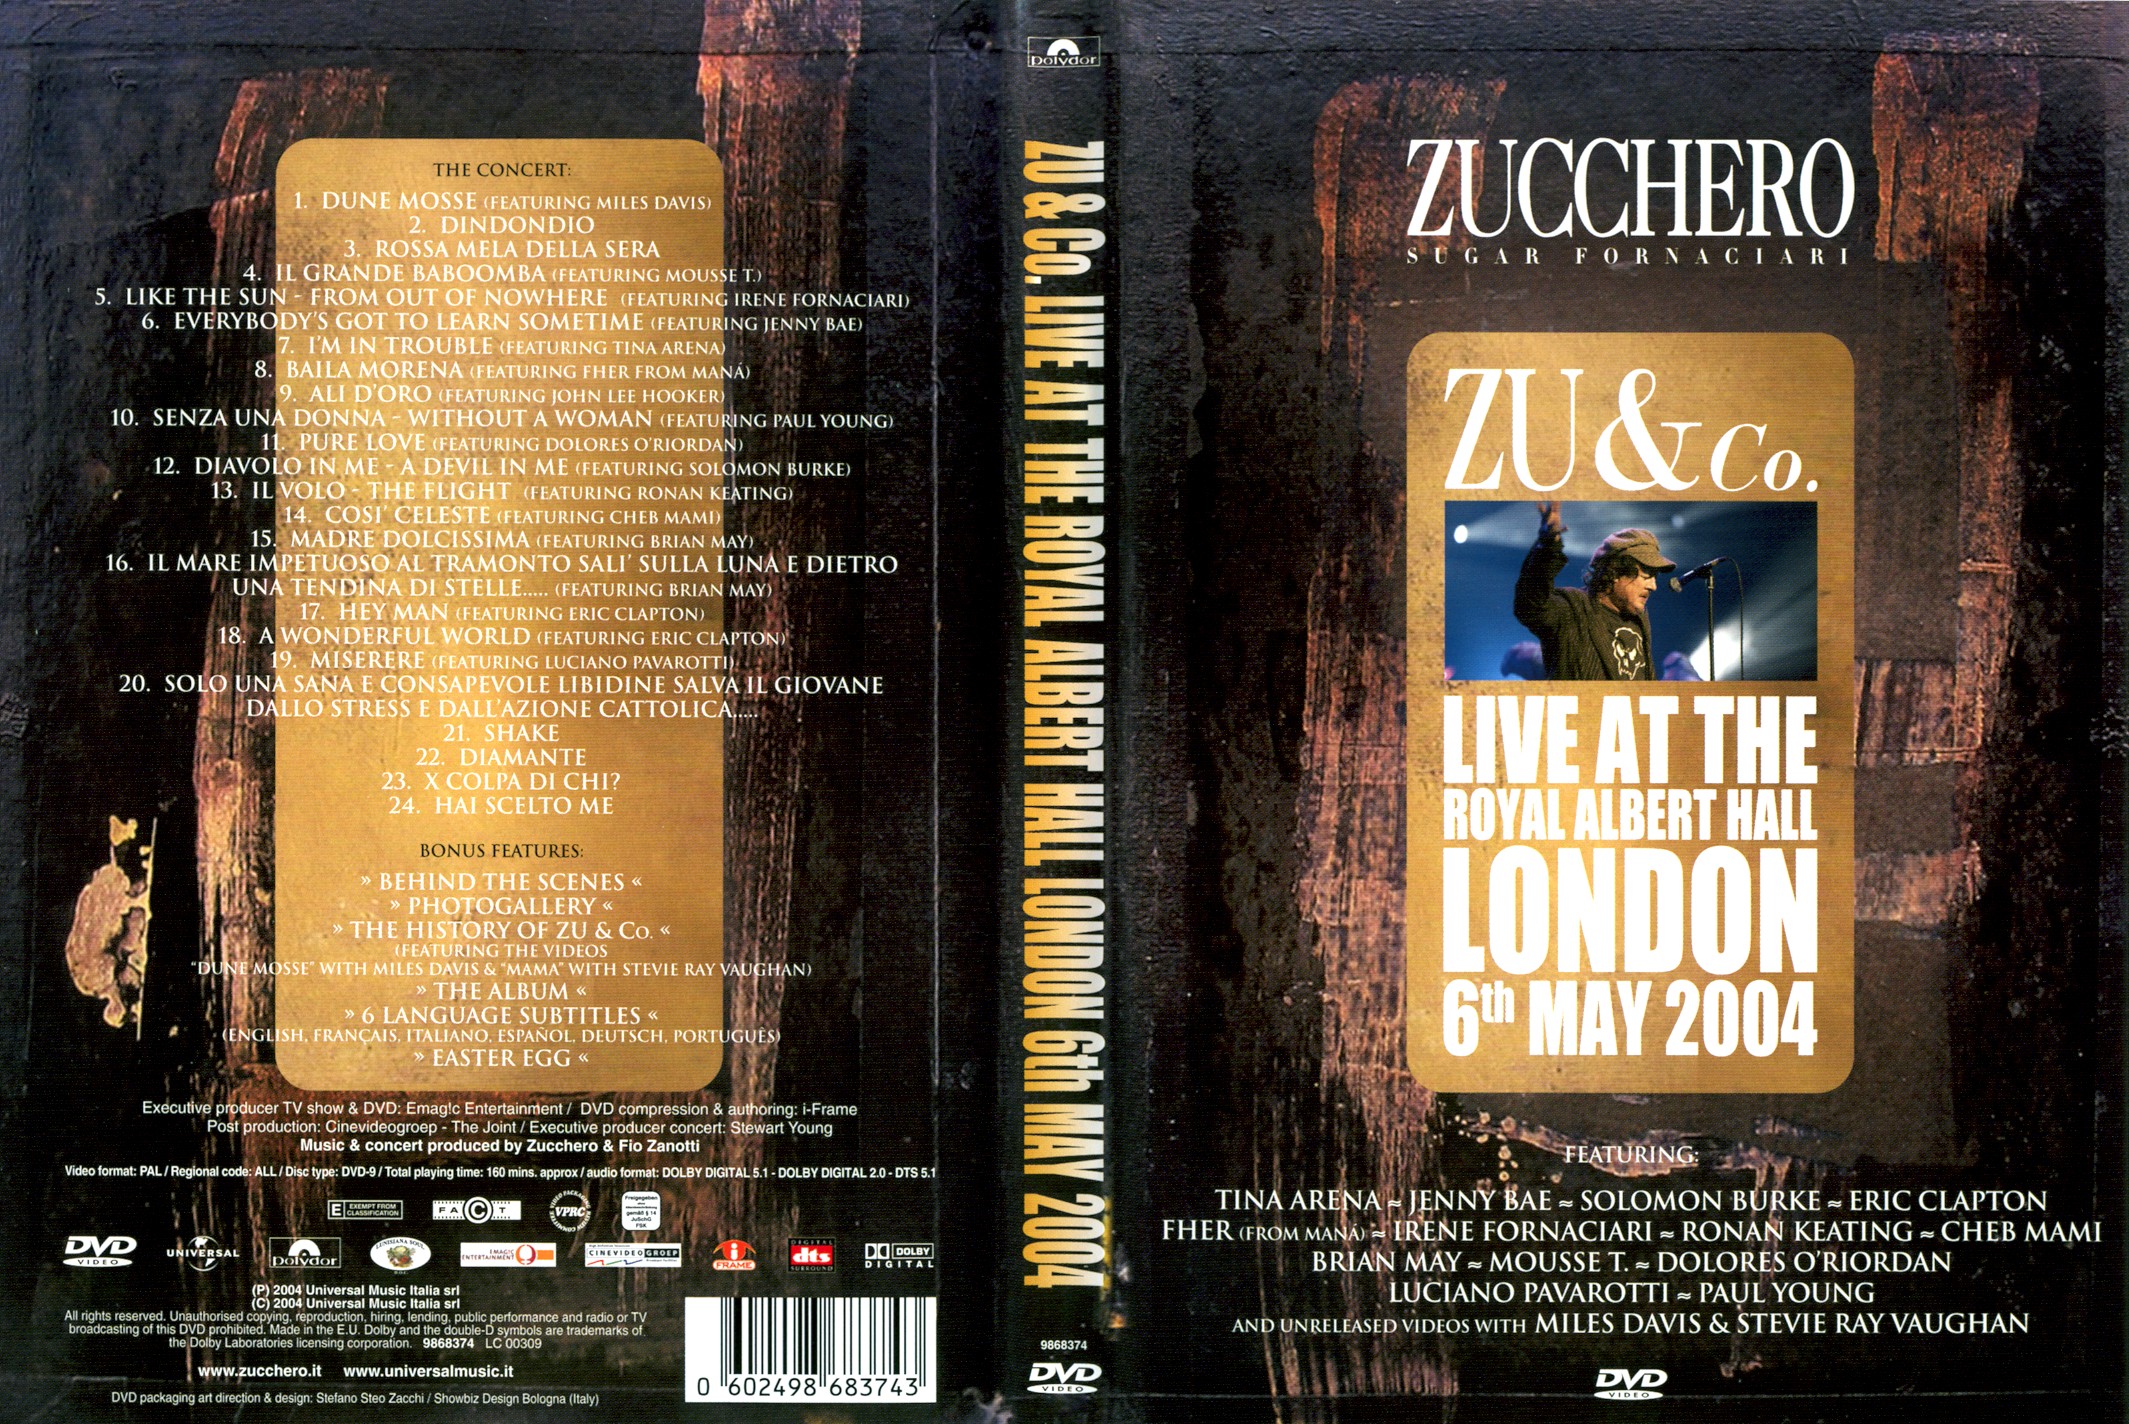 Jaquette DVD Zucchero - Zu and Co live at London 2004 v2